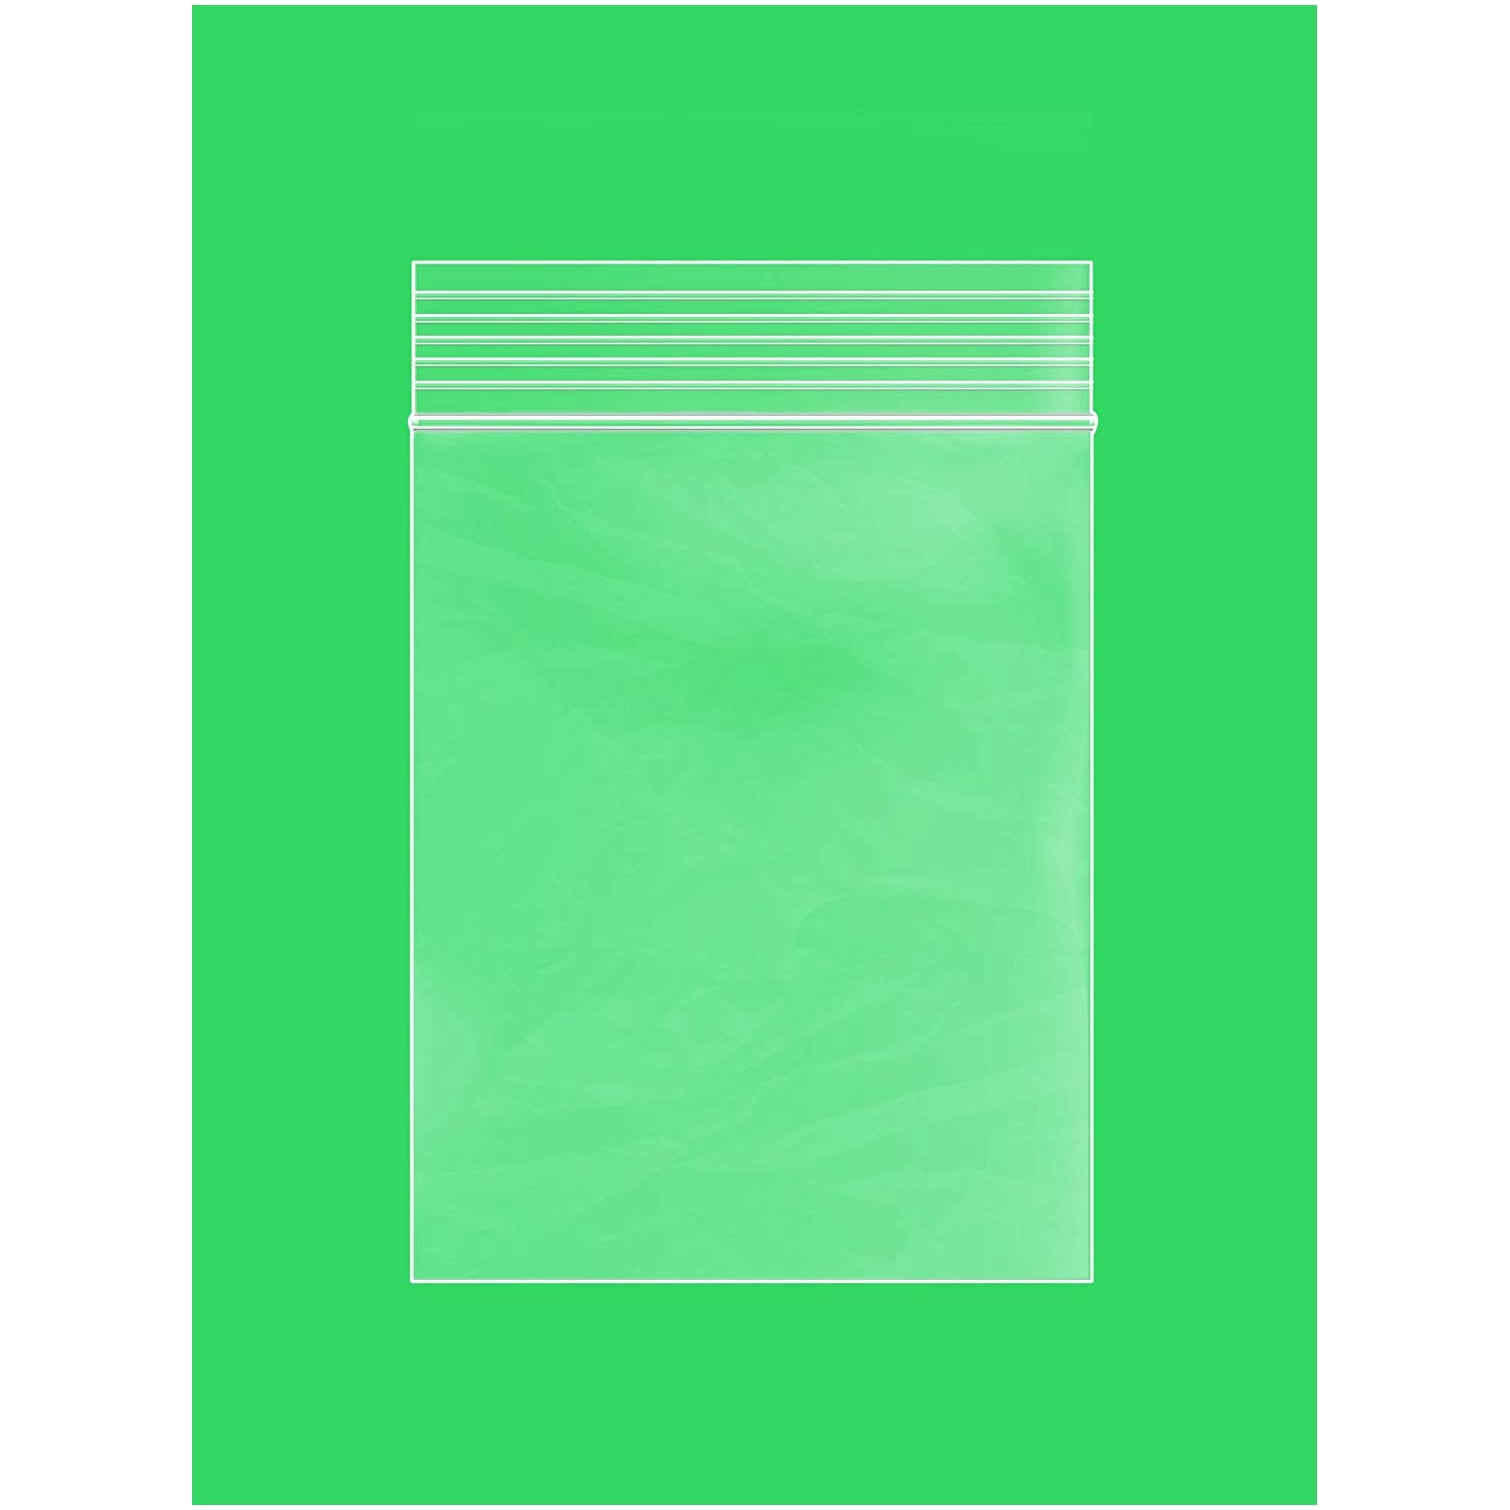 Bulk GPI Pack of 100 8 x 10 2 mil Thick Strong & Durable Poly Baggies with Resealable Zip Top Lock for Travel Clear Plastic RECLOSABLE Zip Bags Storage Packaging & Shipping.